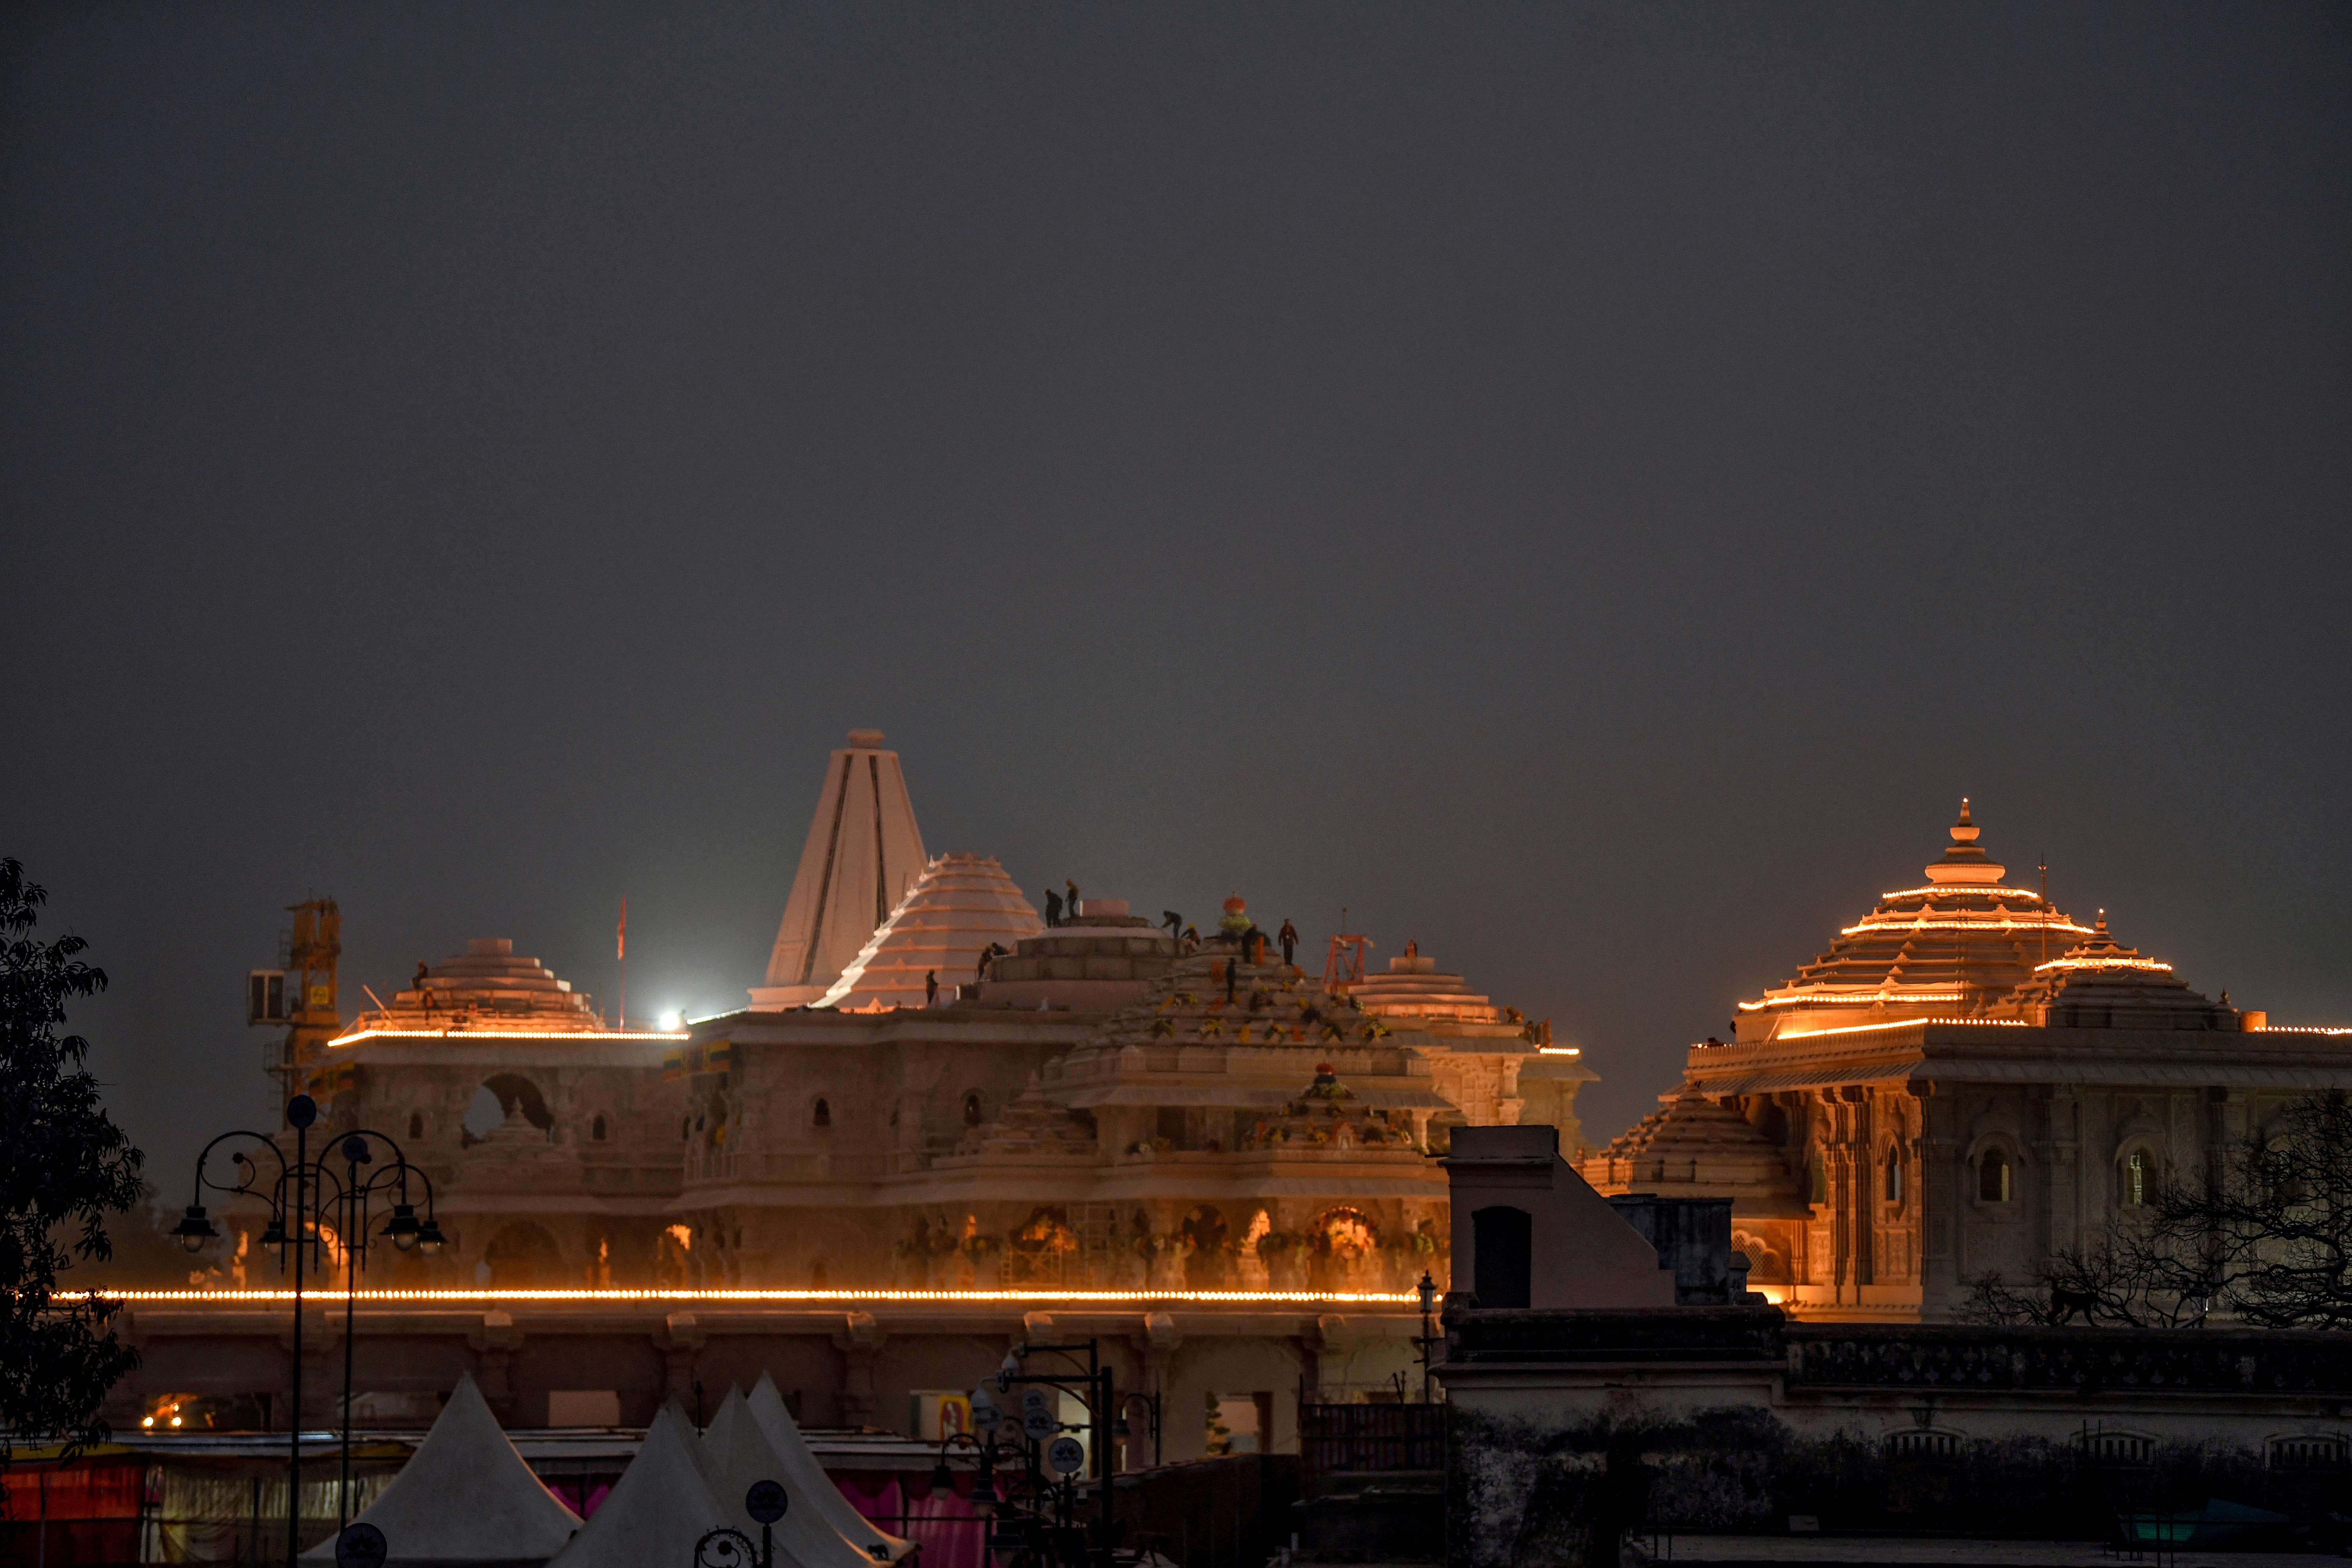 January 22: Historic Day & Event in India’s History as All Roads Lead to Ayodhya